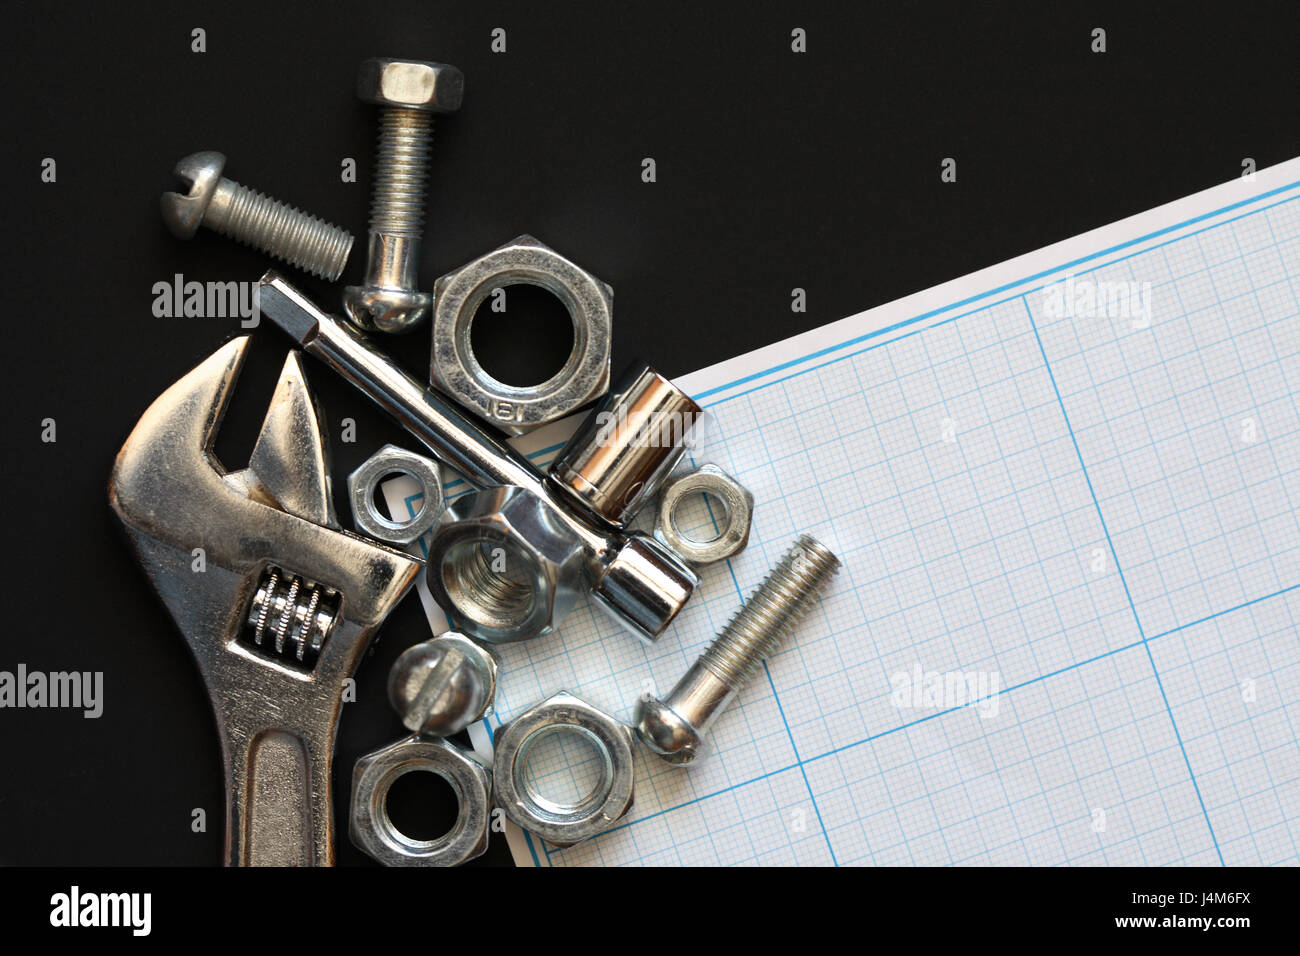 Business concept. Few screw nuts near spanner on graph paper Stock Photo